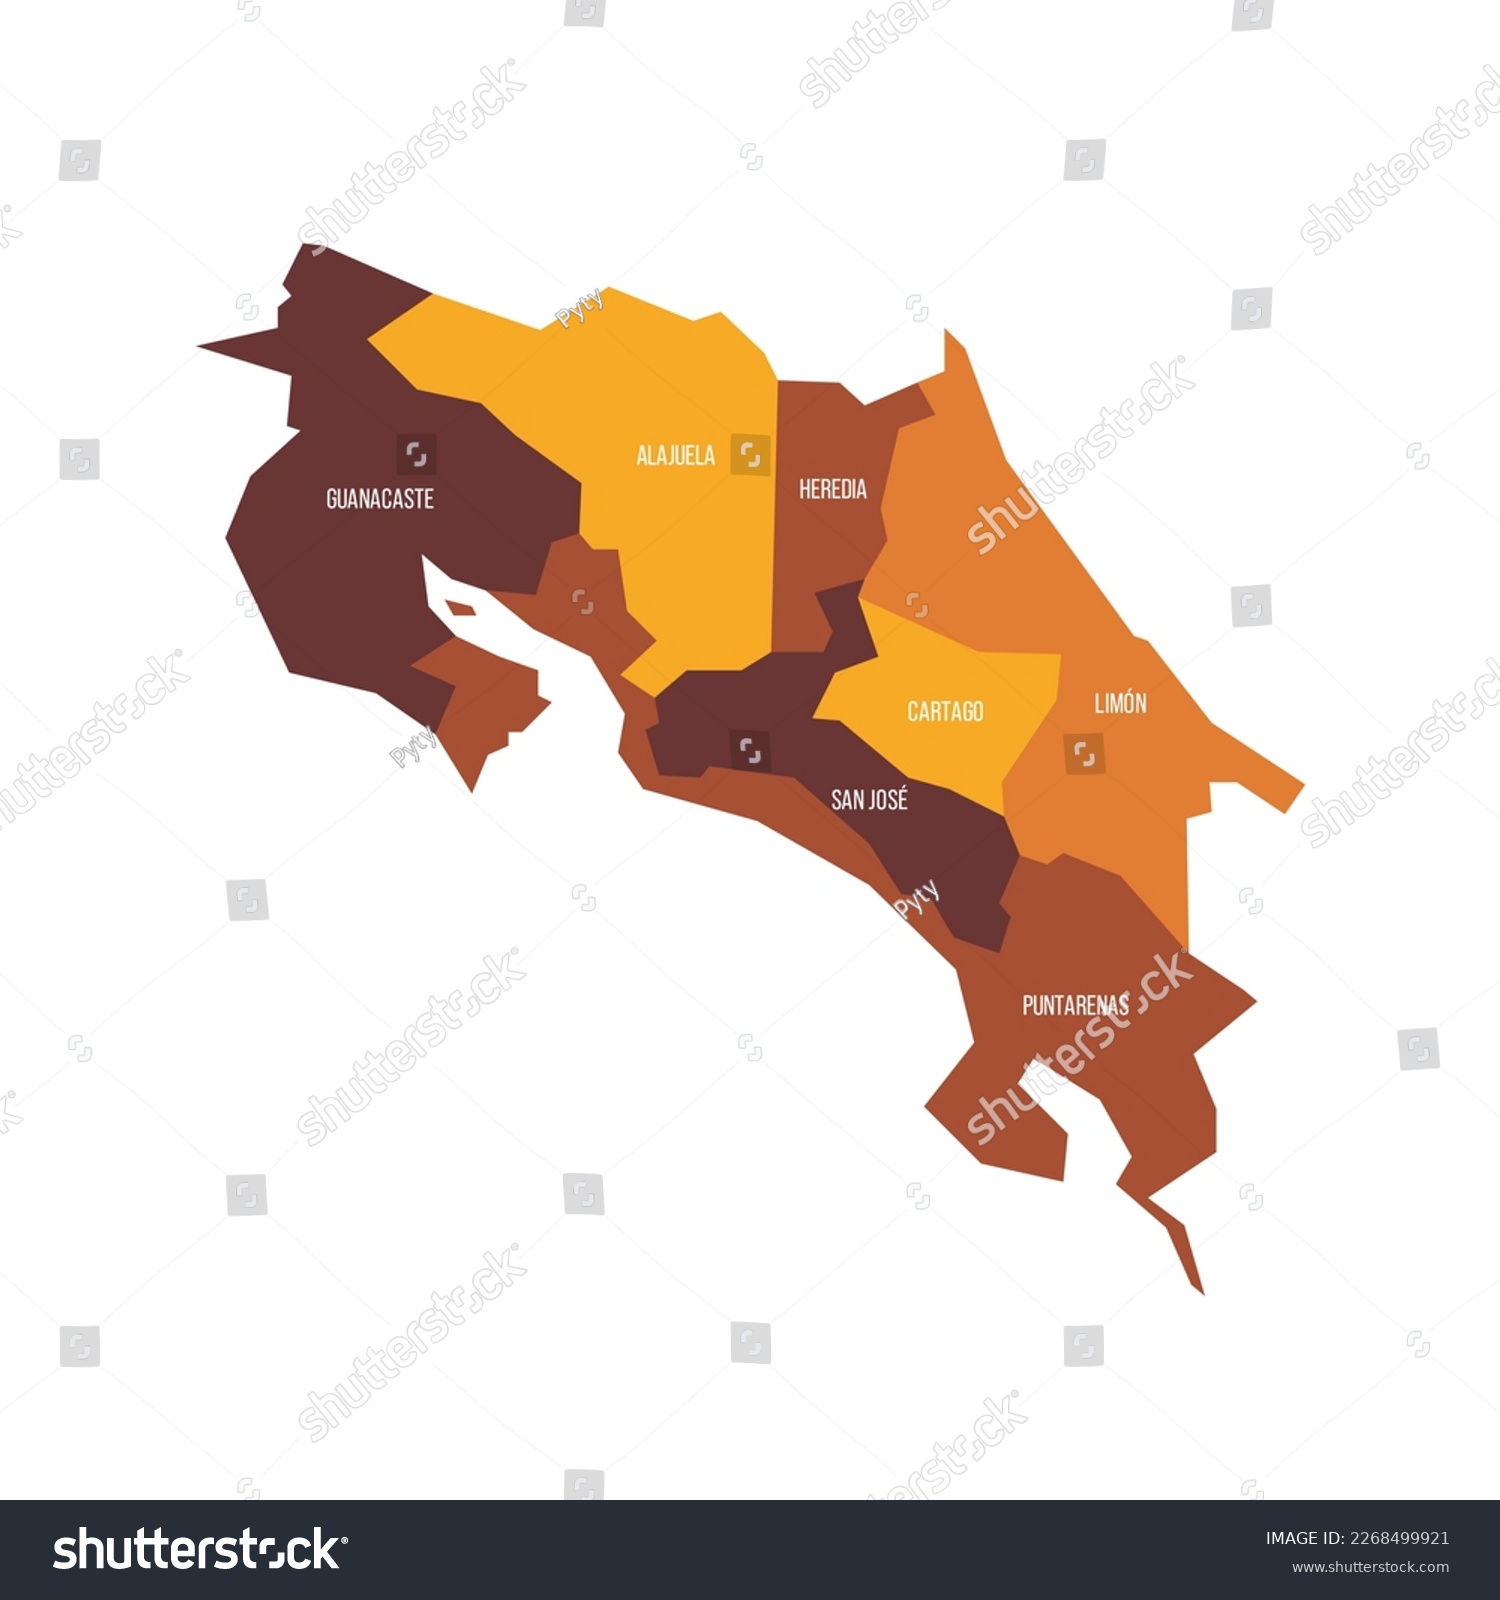 Costa Rica Political Map Of Administrative Royalty Free Stock Vector 2268499921 0239